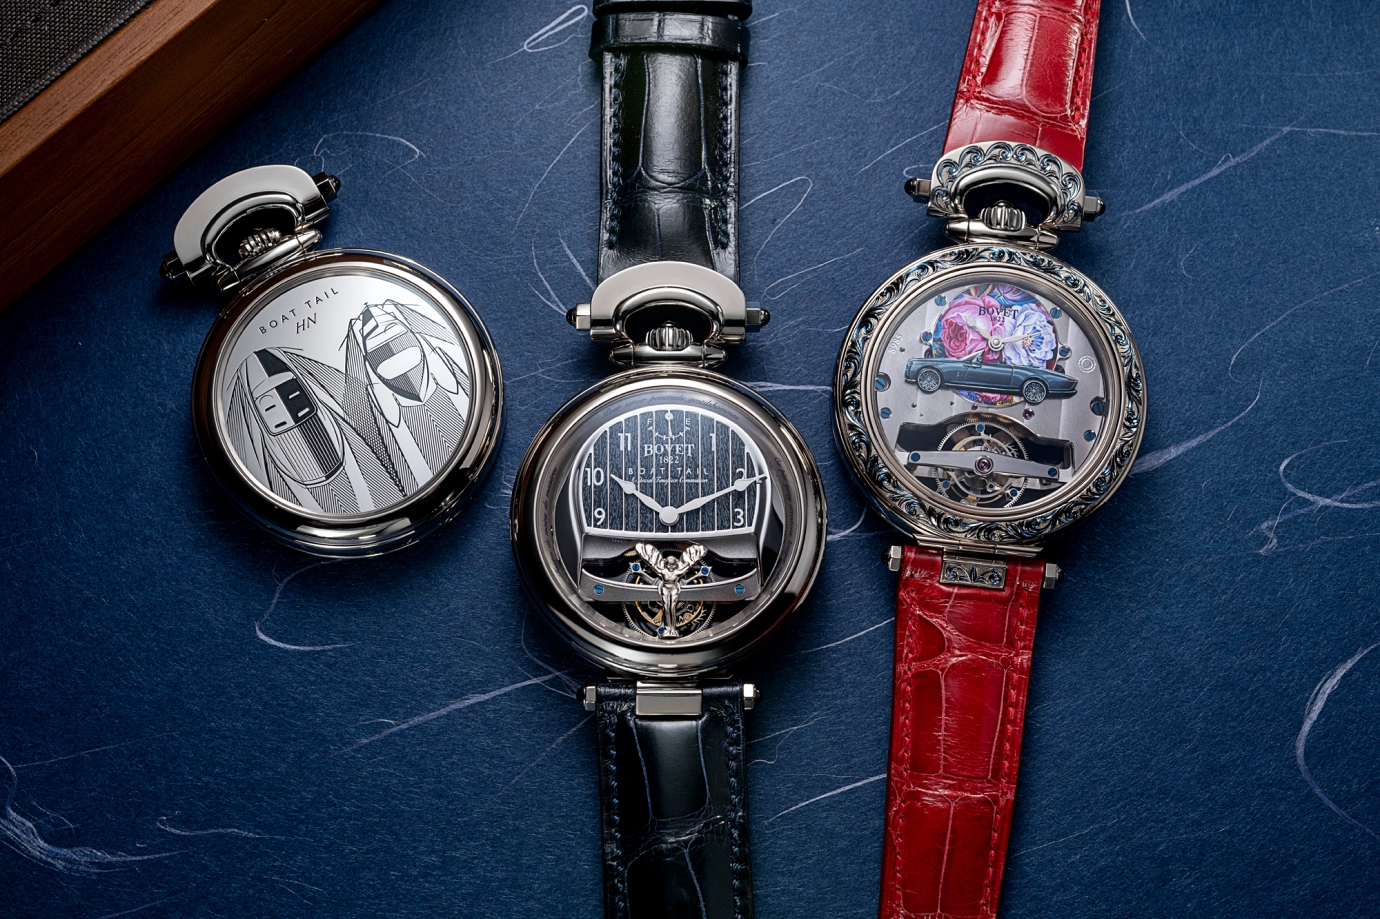 Bovet's signature Fleurier collection is easily converted from pocketwatch to wristwatch thanks to the amadeo system